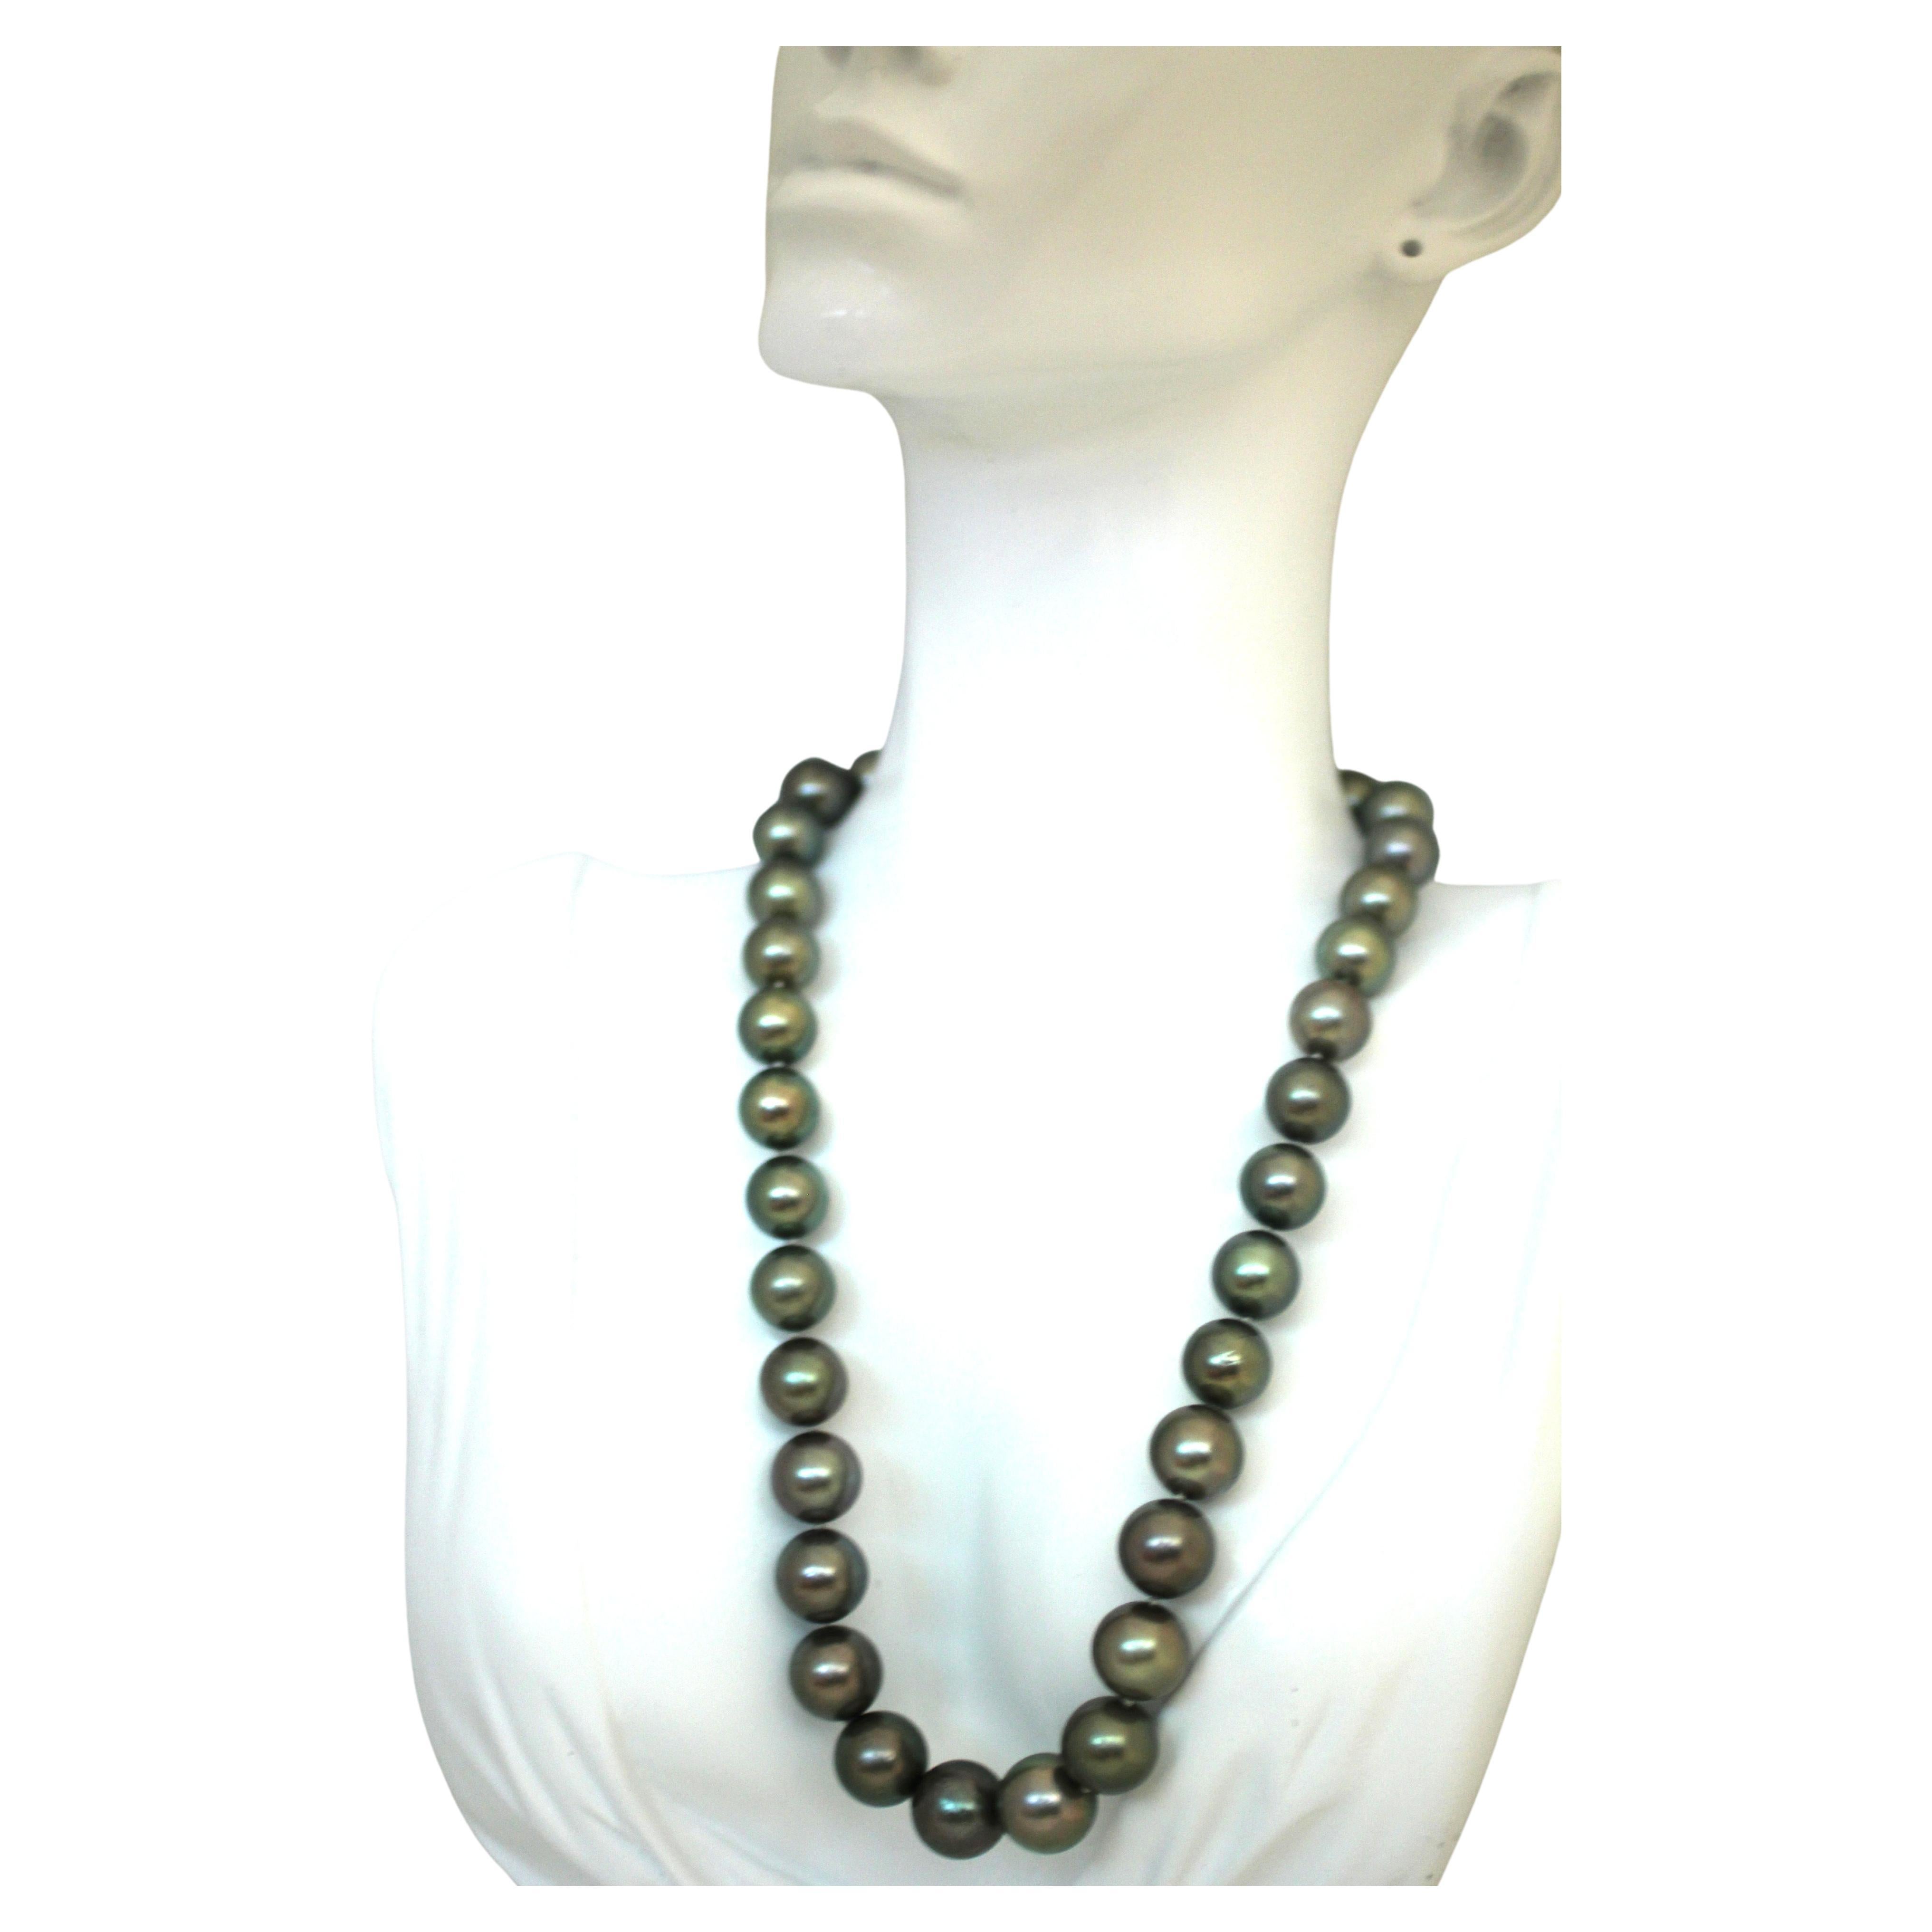 Women's Hakimoto 13x10 mm Tahitian South Sea Pearl Necklace 18K White Gold Clasp